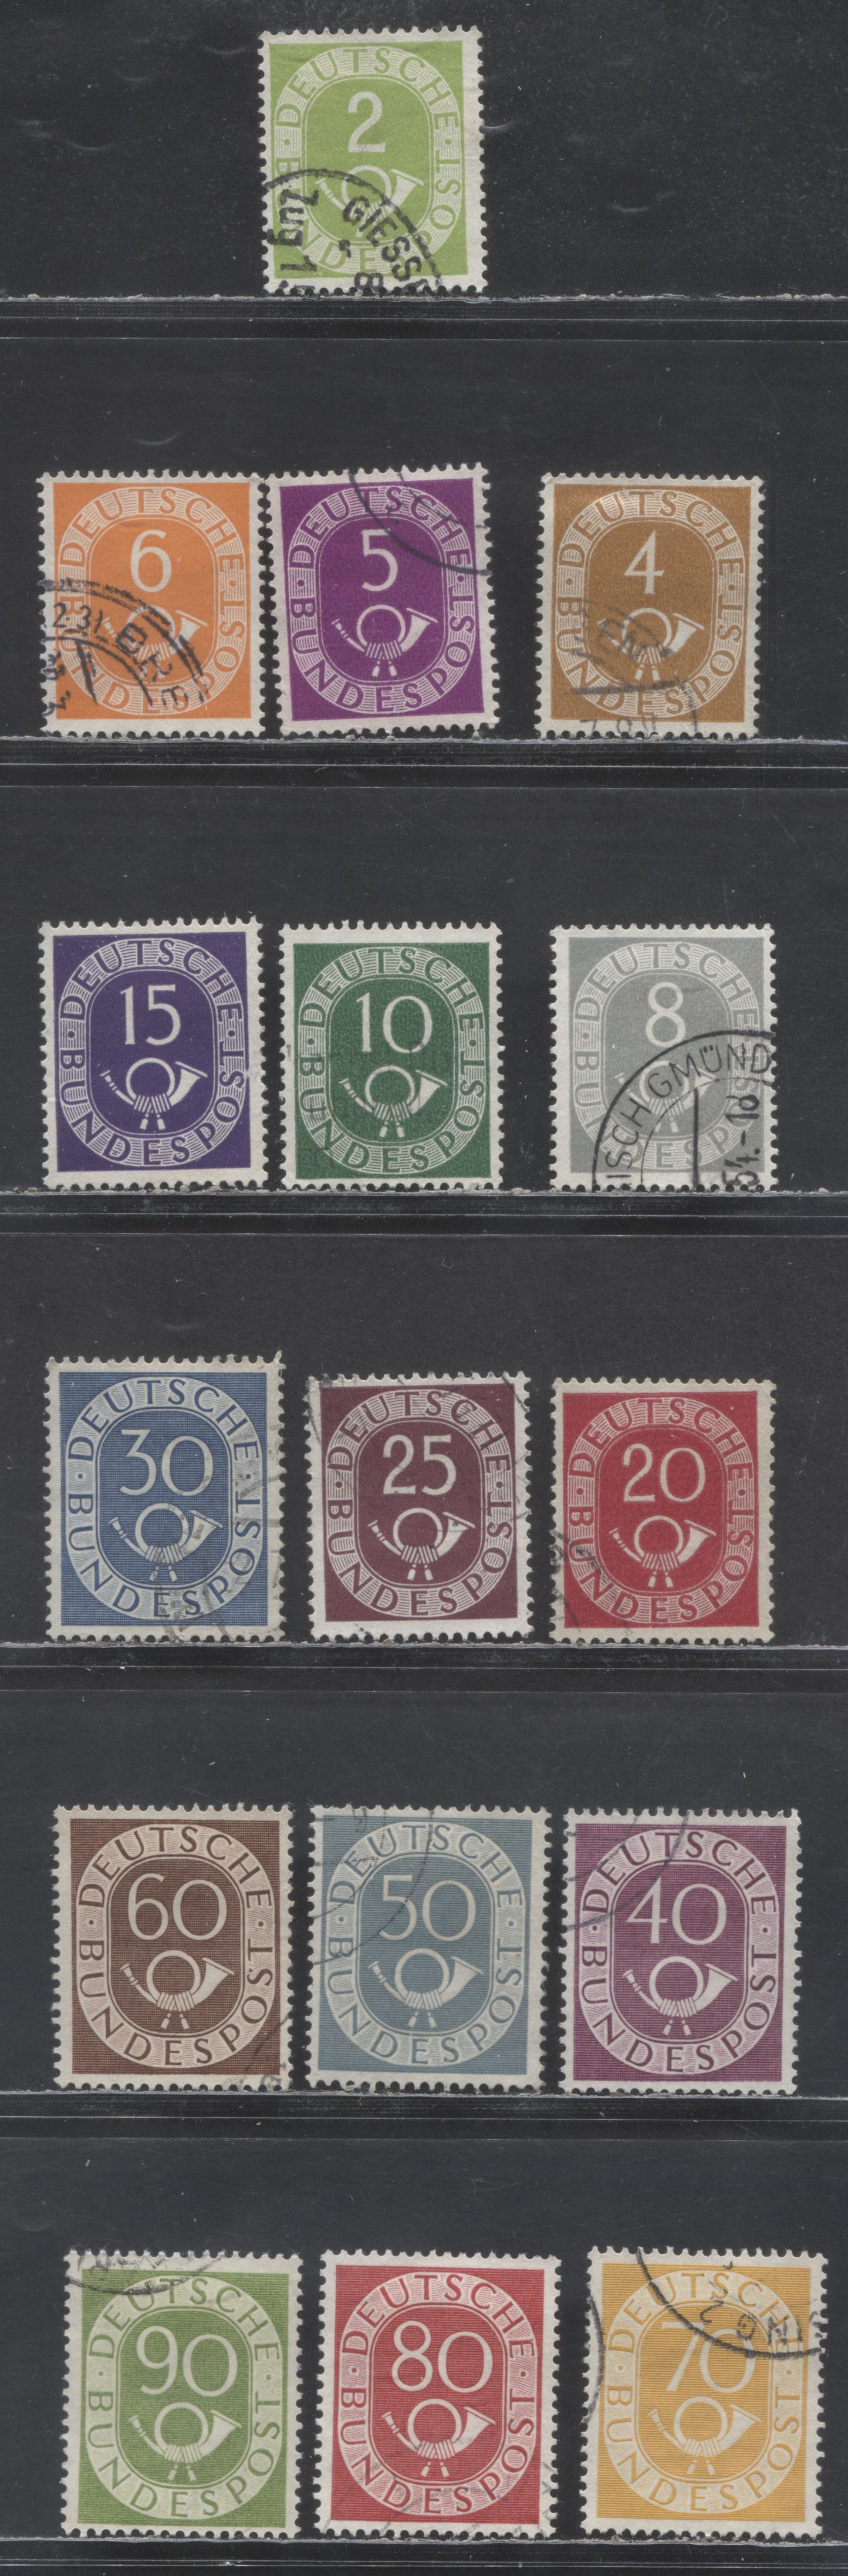 Lot 19 Germany SC#670-685 1951-1952 Posthorns Definitives, 16 Very Fine Used Singles, Click on Listing to See ALL Pictures, 2022 Scott Cat. $40.9